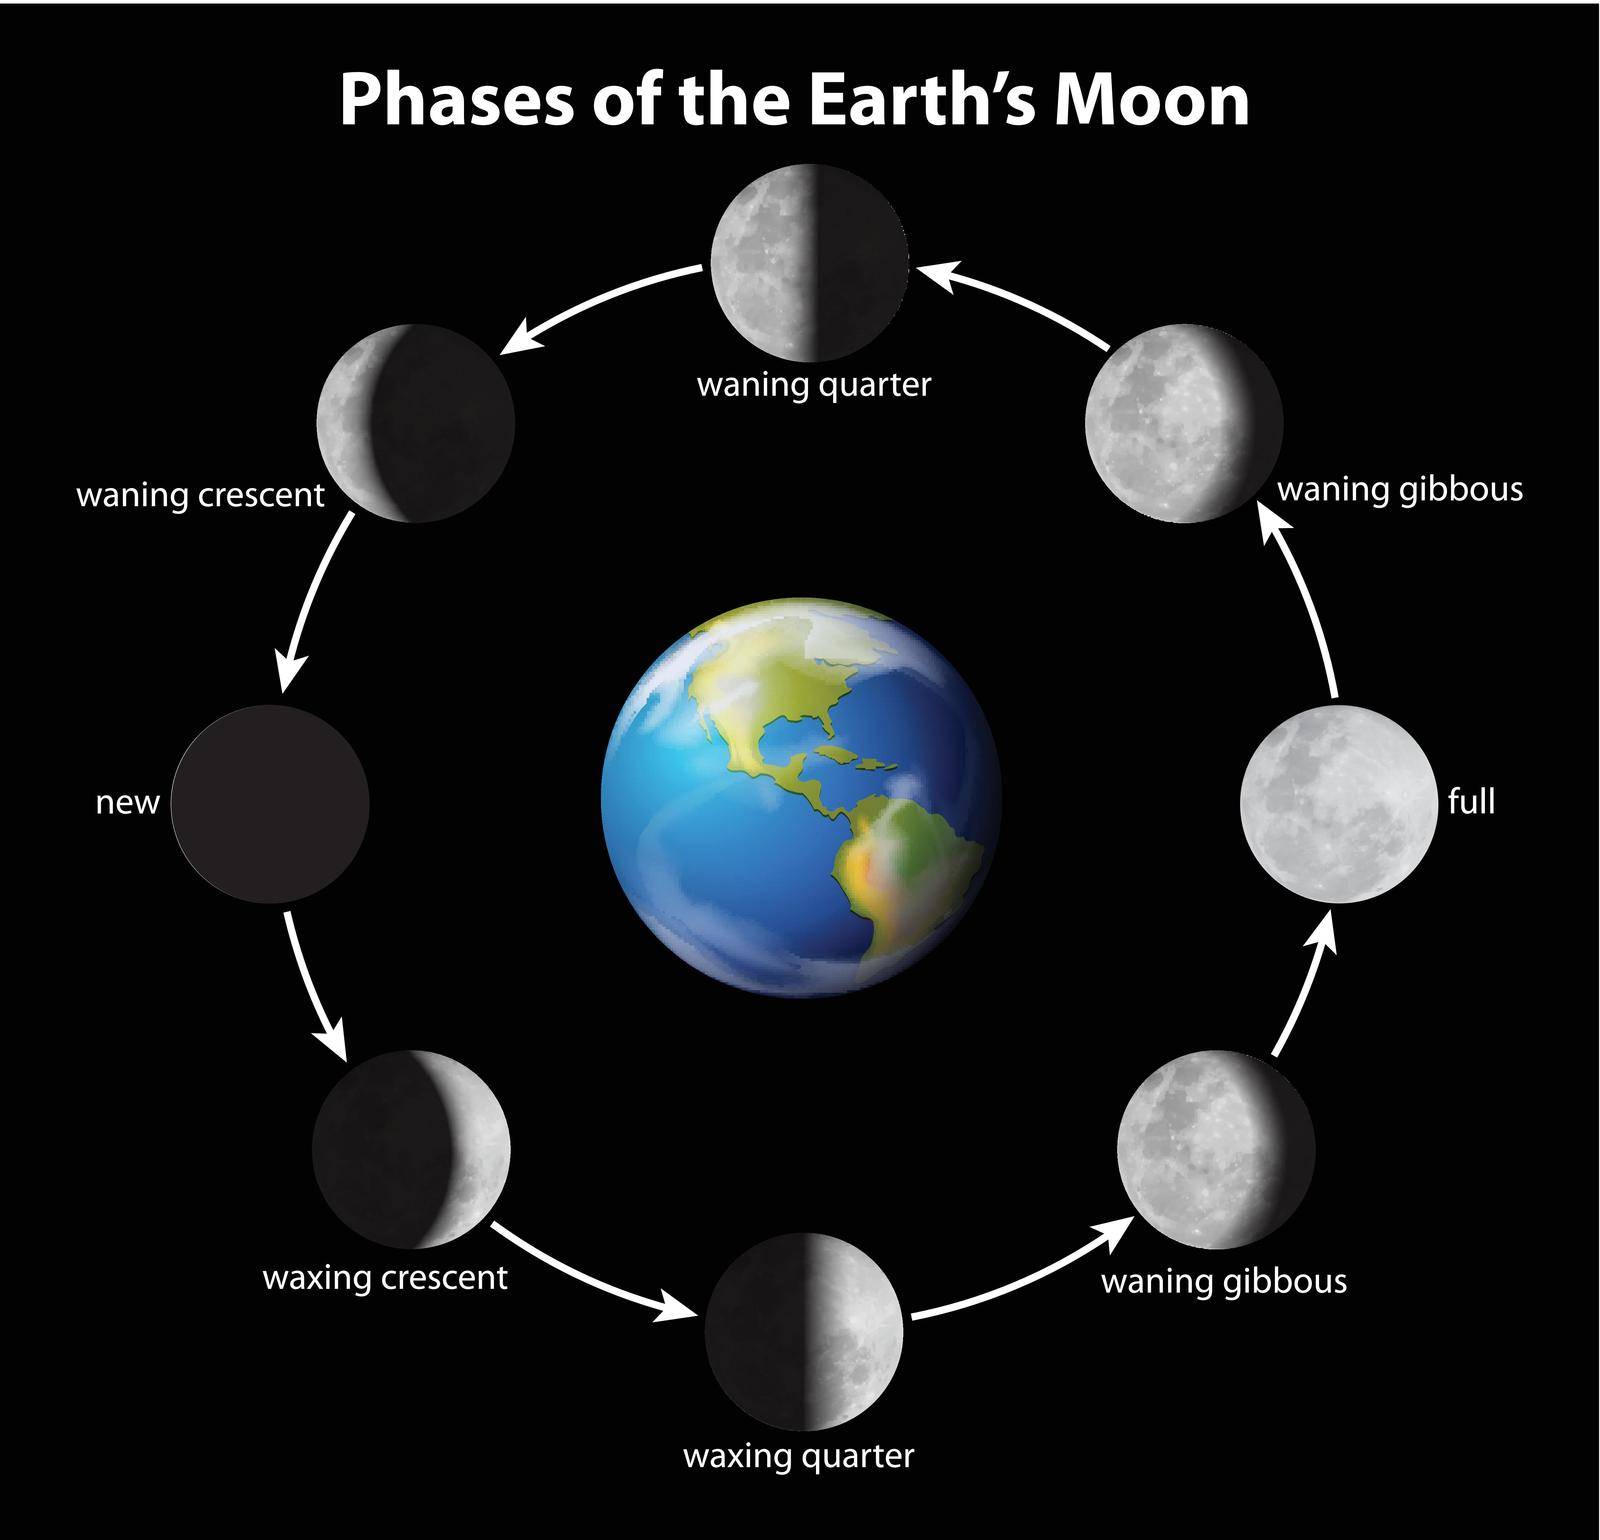 Phases on the Moon as seen from Earth